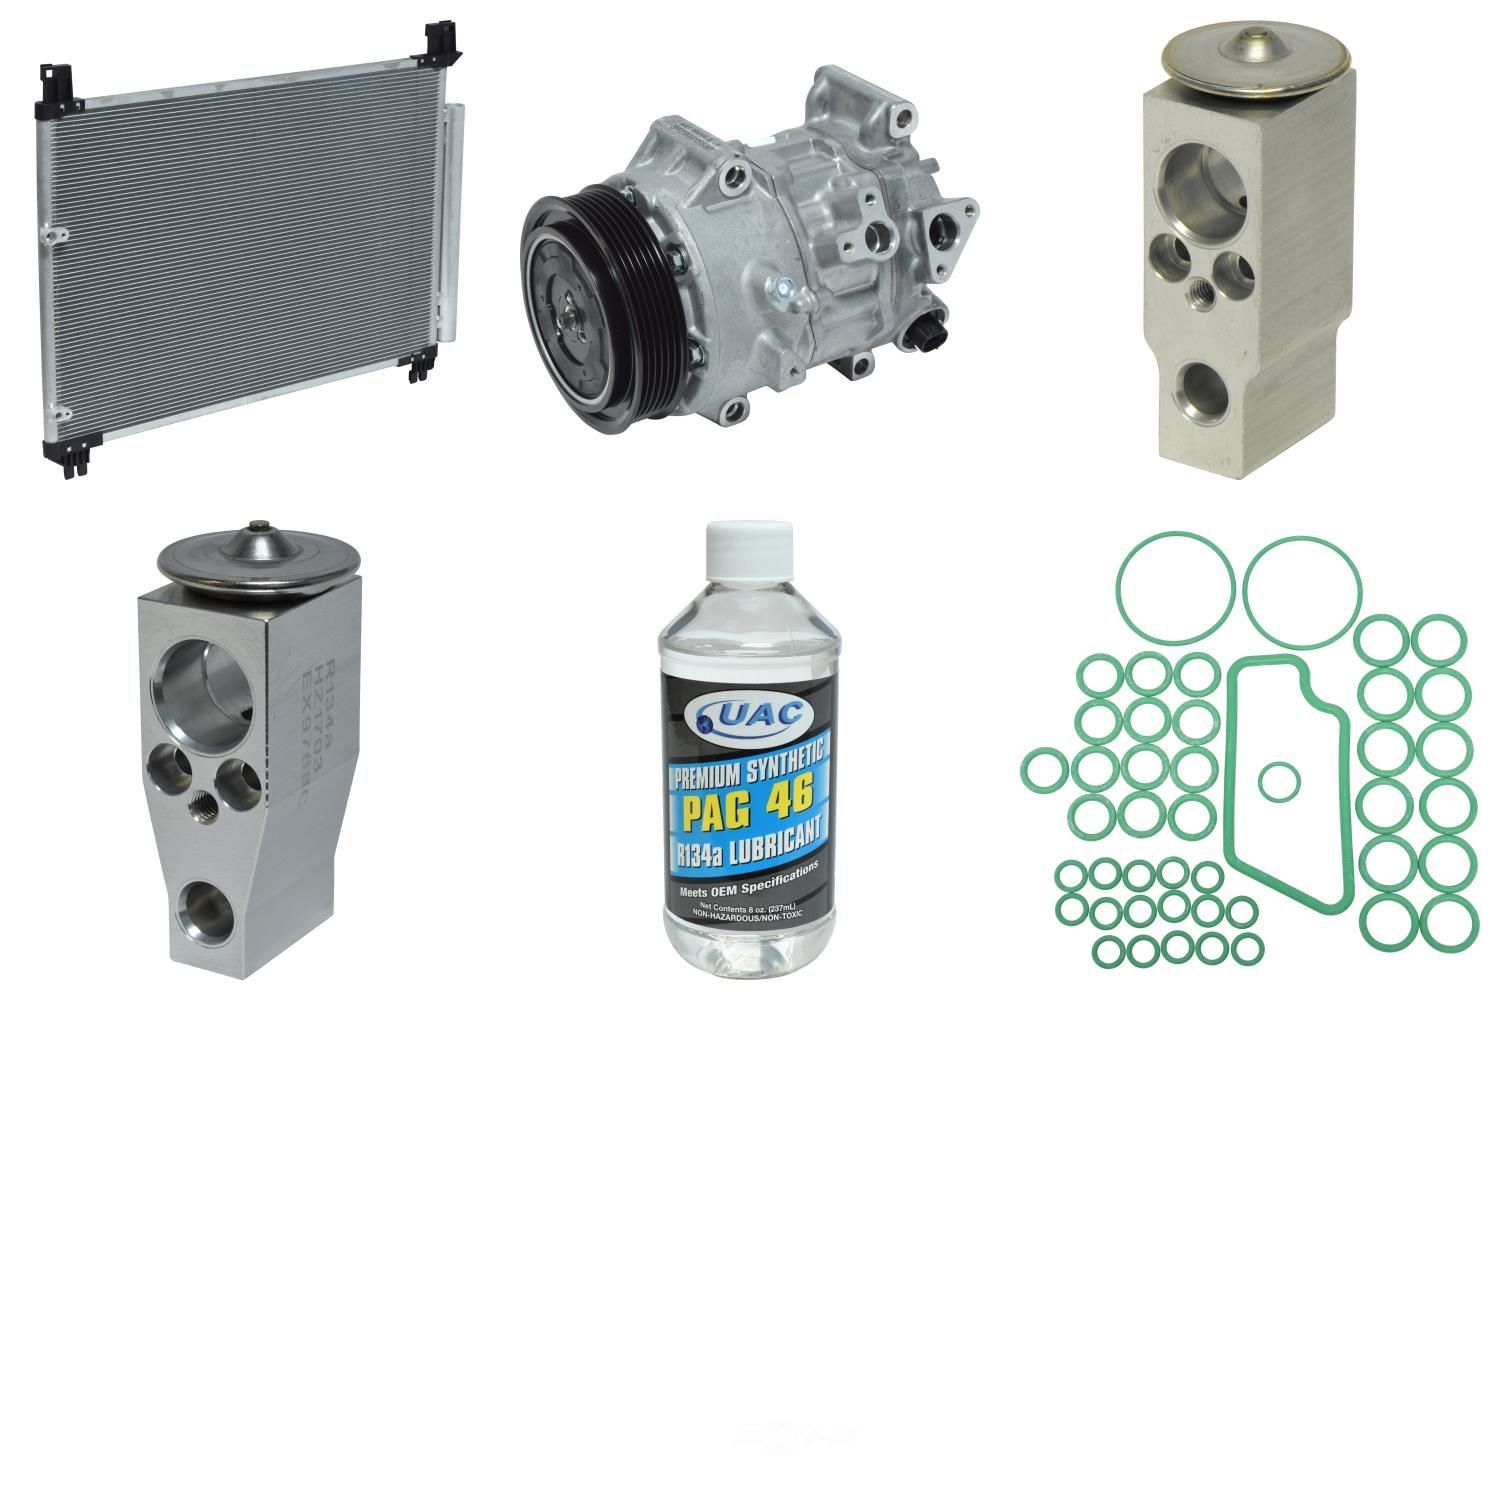 UNIVERSAL AIR CONDITIONER, INC. - Compressor-condenser Replacement Kit - UAC KT 5559A